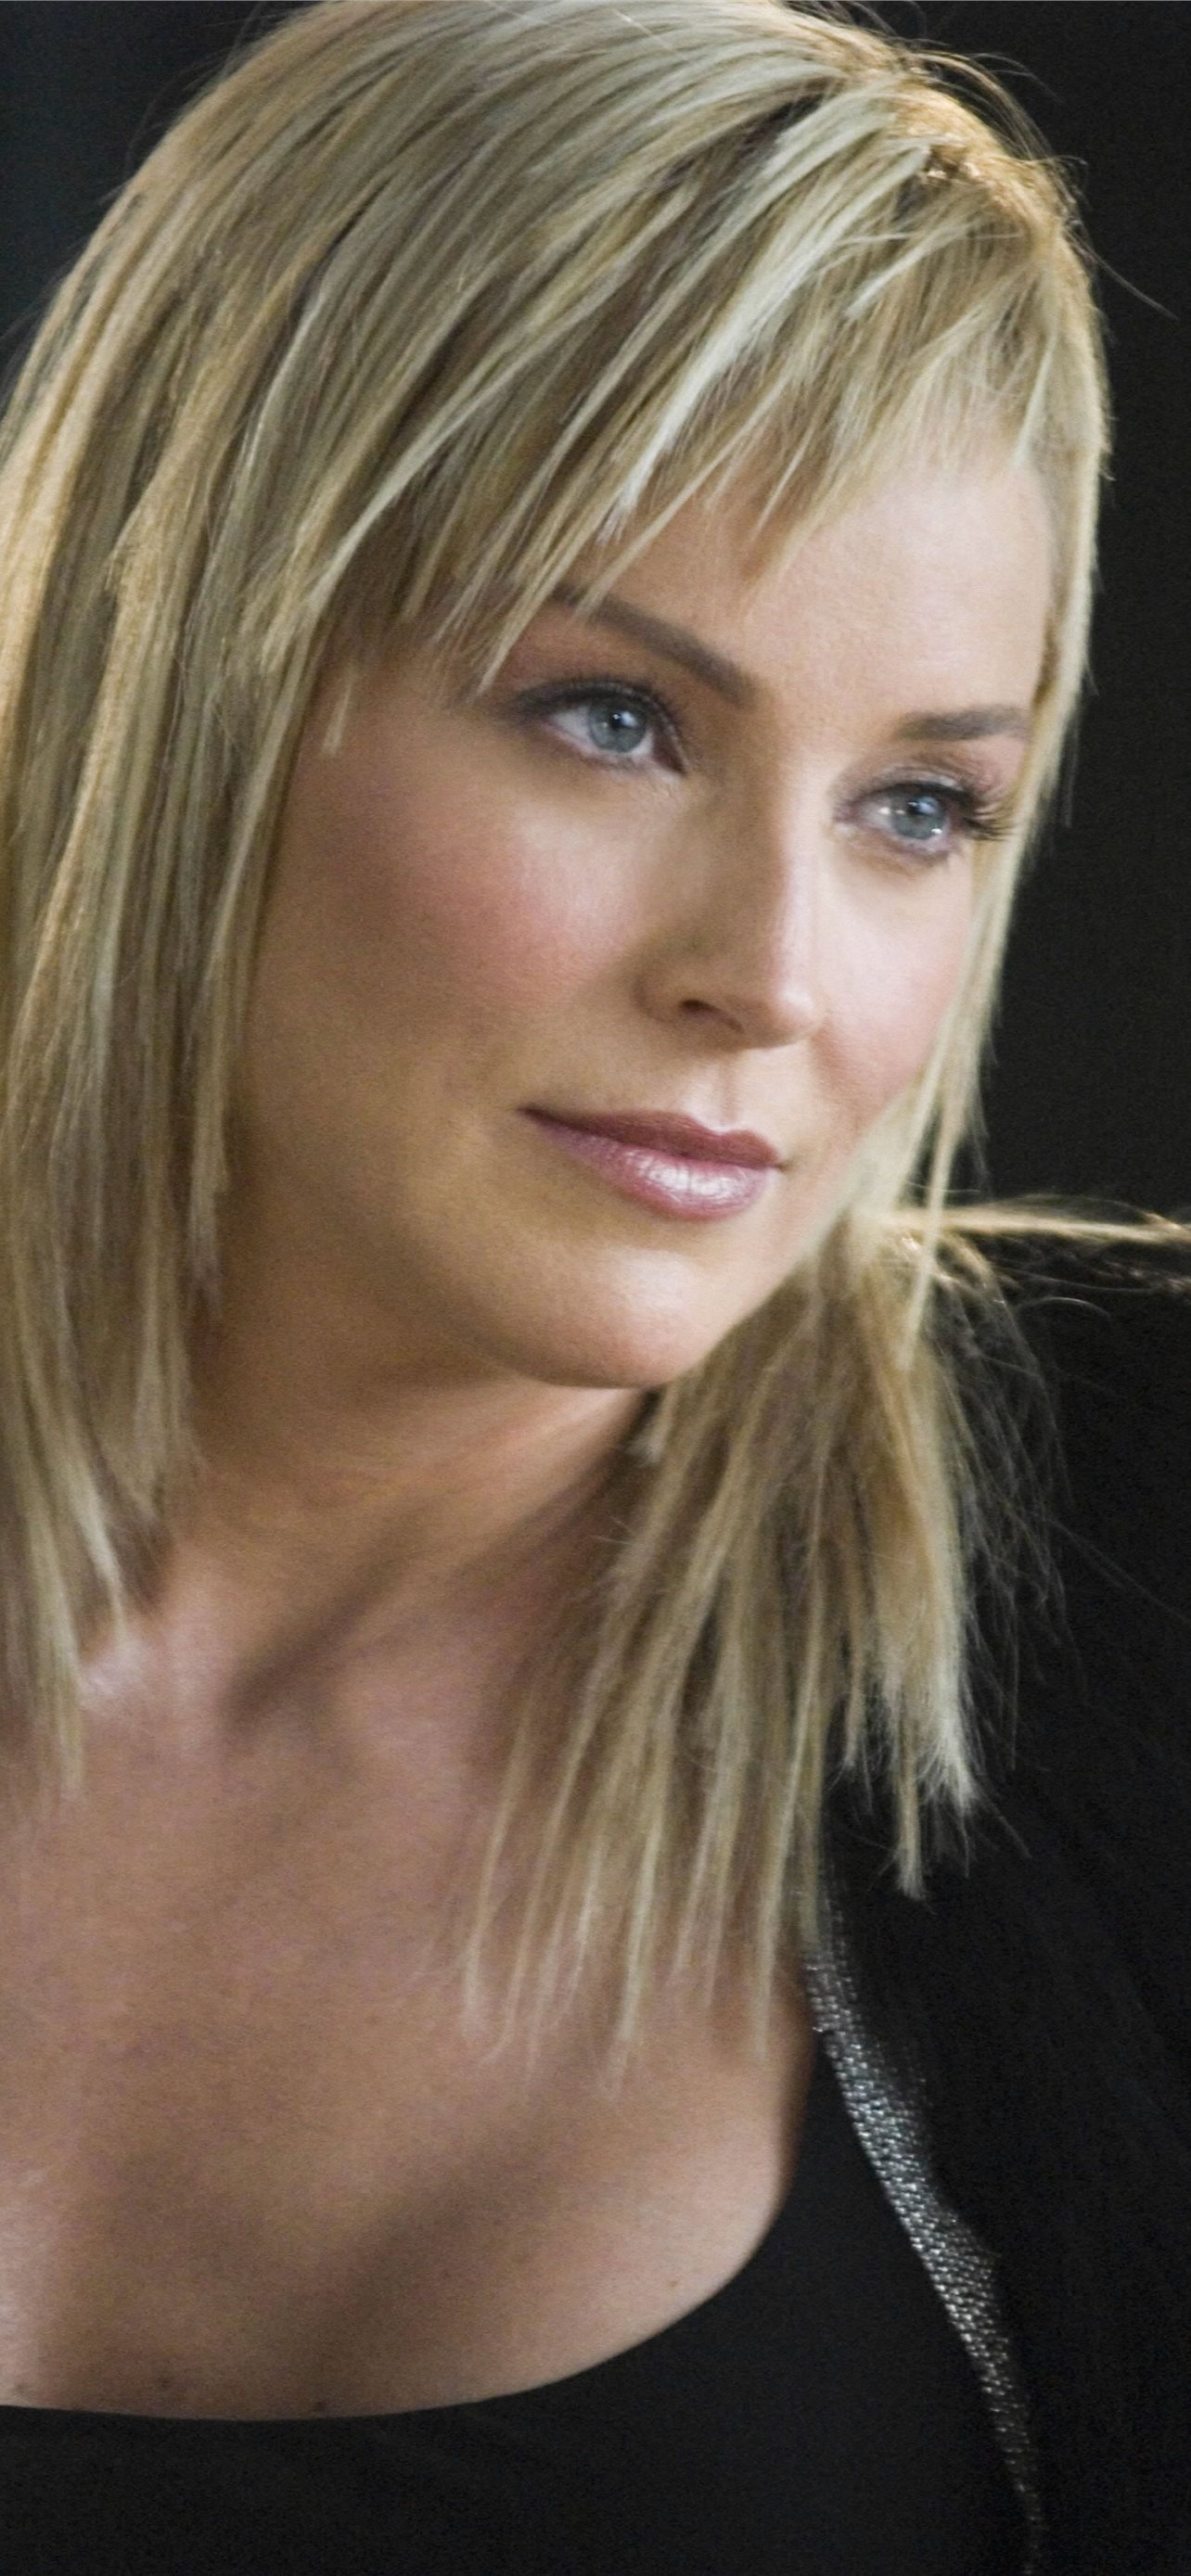 Sharon Stone, Best wallpapers, iPhone HD wallpapers, Hollywood beauty, 1290x2780 HD Handy